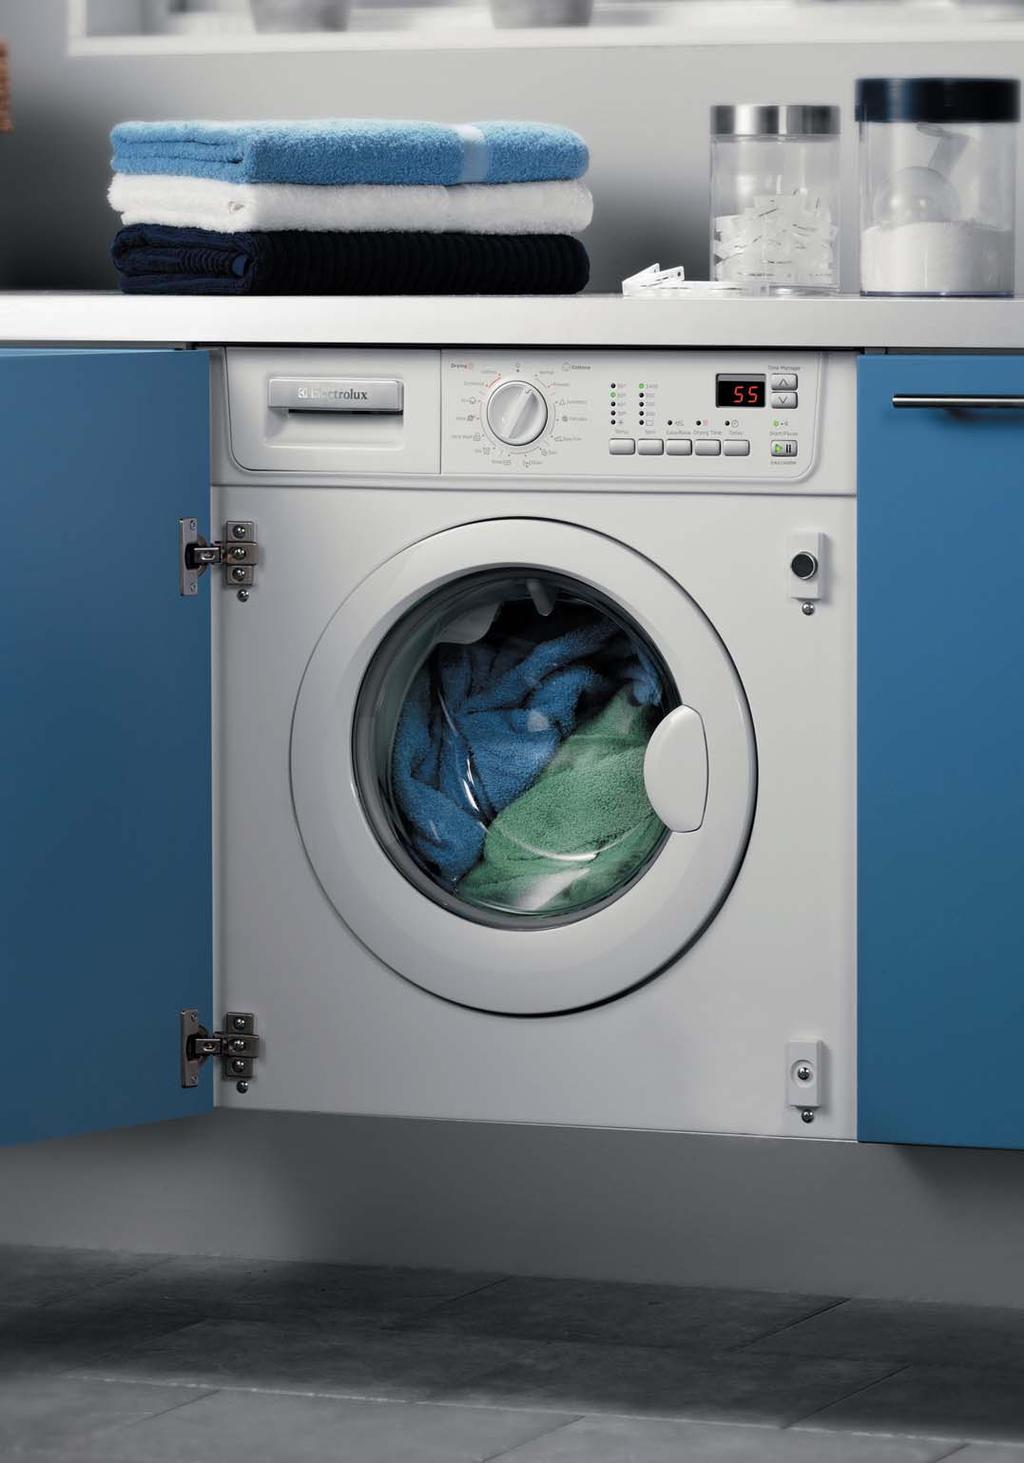 84 electrolux laundry electrolux laundry 85 Washing machines and washer dryers that can handwash too! We really have tried to think of everything when designing our laundry appliances for you.